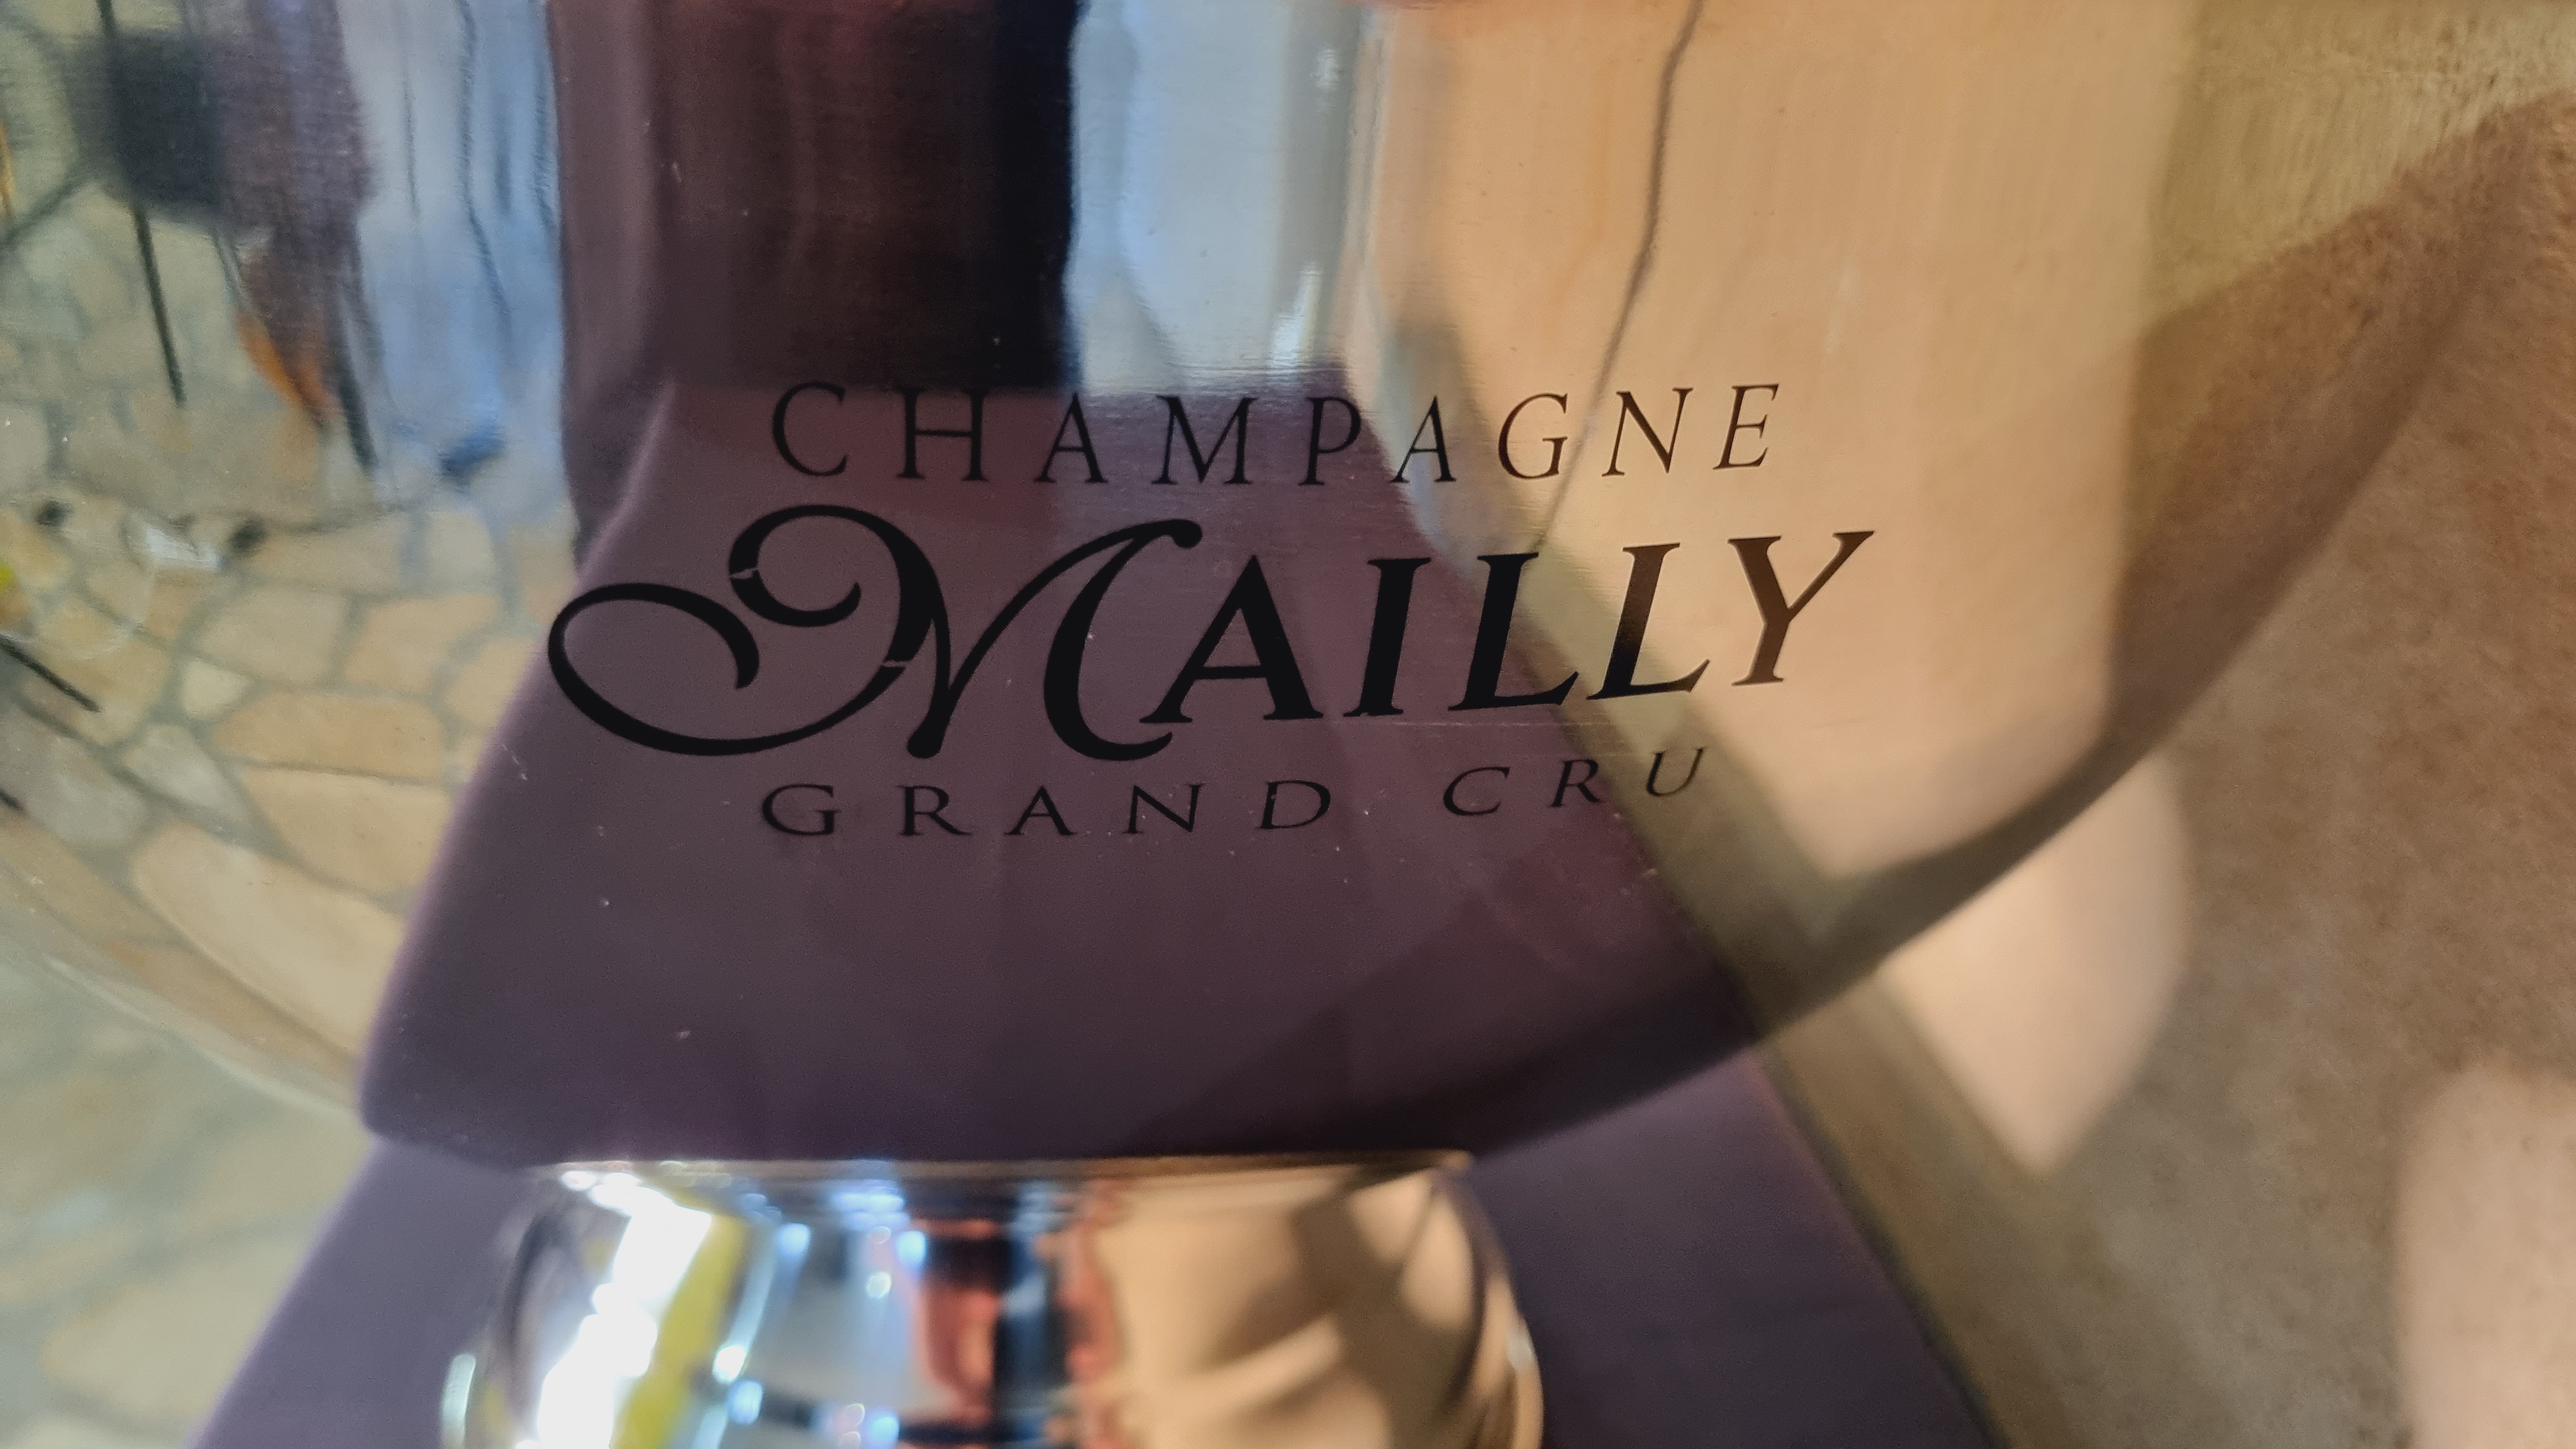 mailly_champagne_cooler_xxl_vasque_de_champagne_pour_several_bottles_for_sale_champagneclub_3.jpg